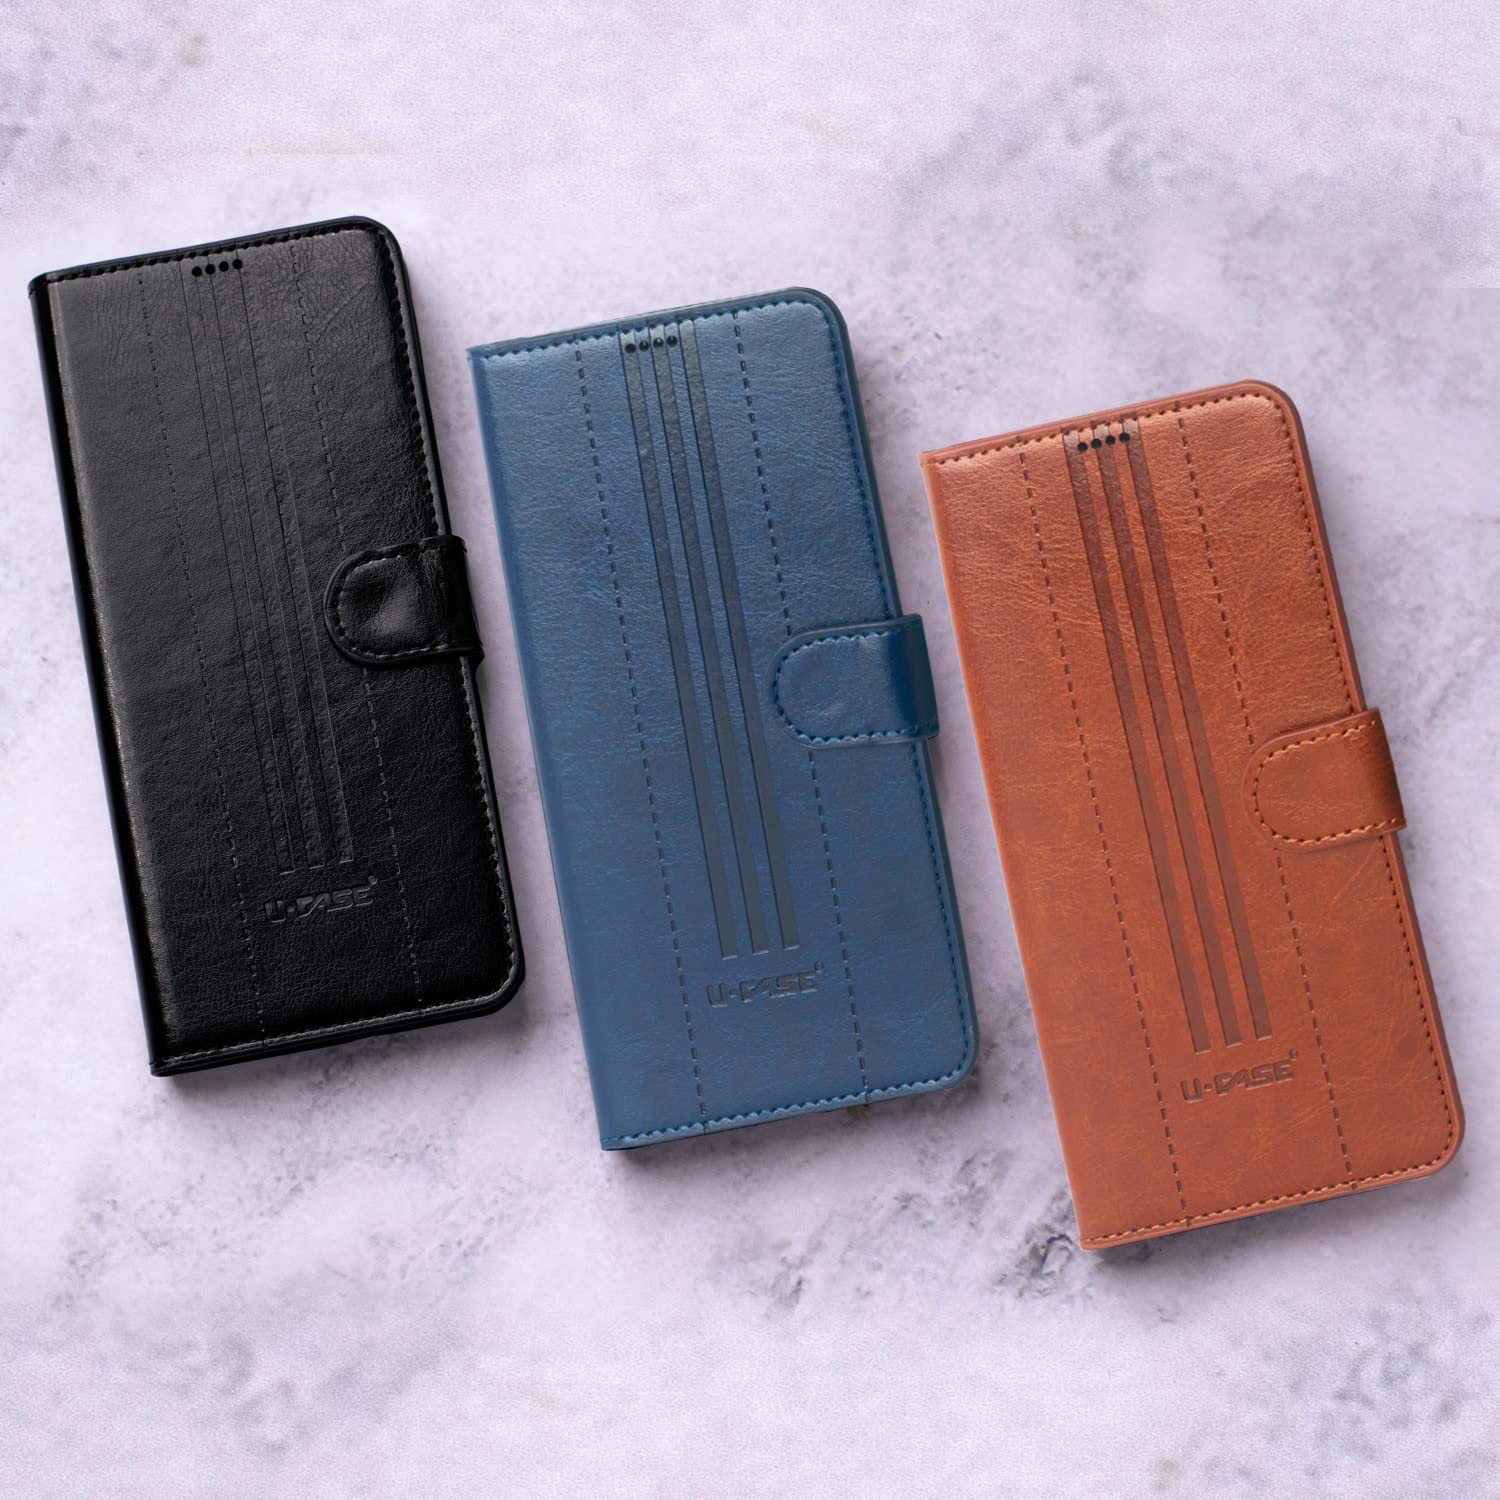 Shop U-CASE Flip Cover for Oppo A3s Vegan Foldable Stand & Pocket Magnetic Closure colors